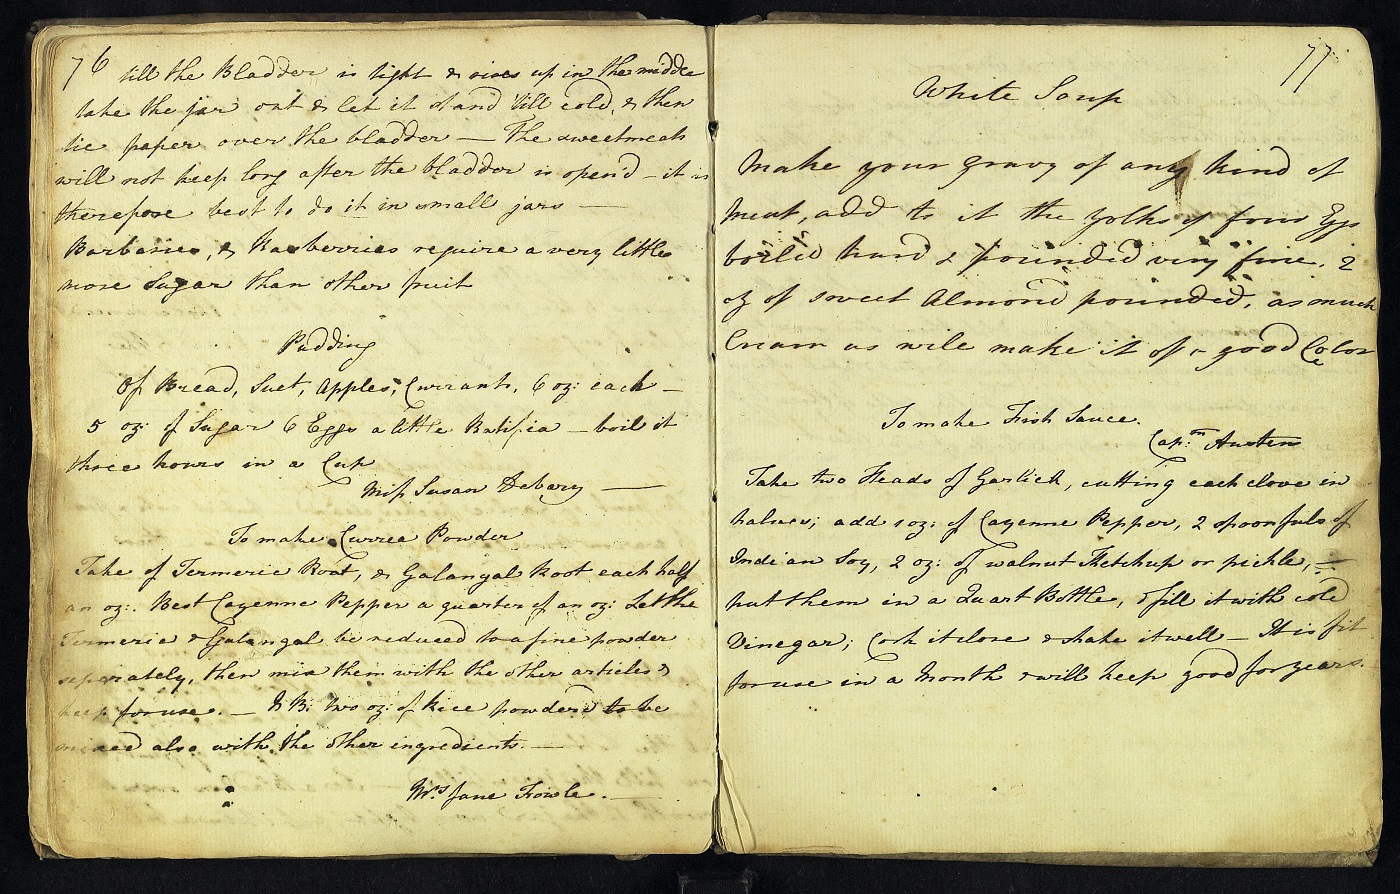 A page from Martha Lloyd's household book showing her handwritten recipe for White Soup